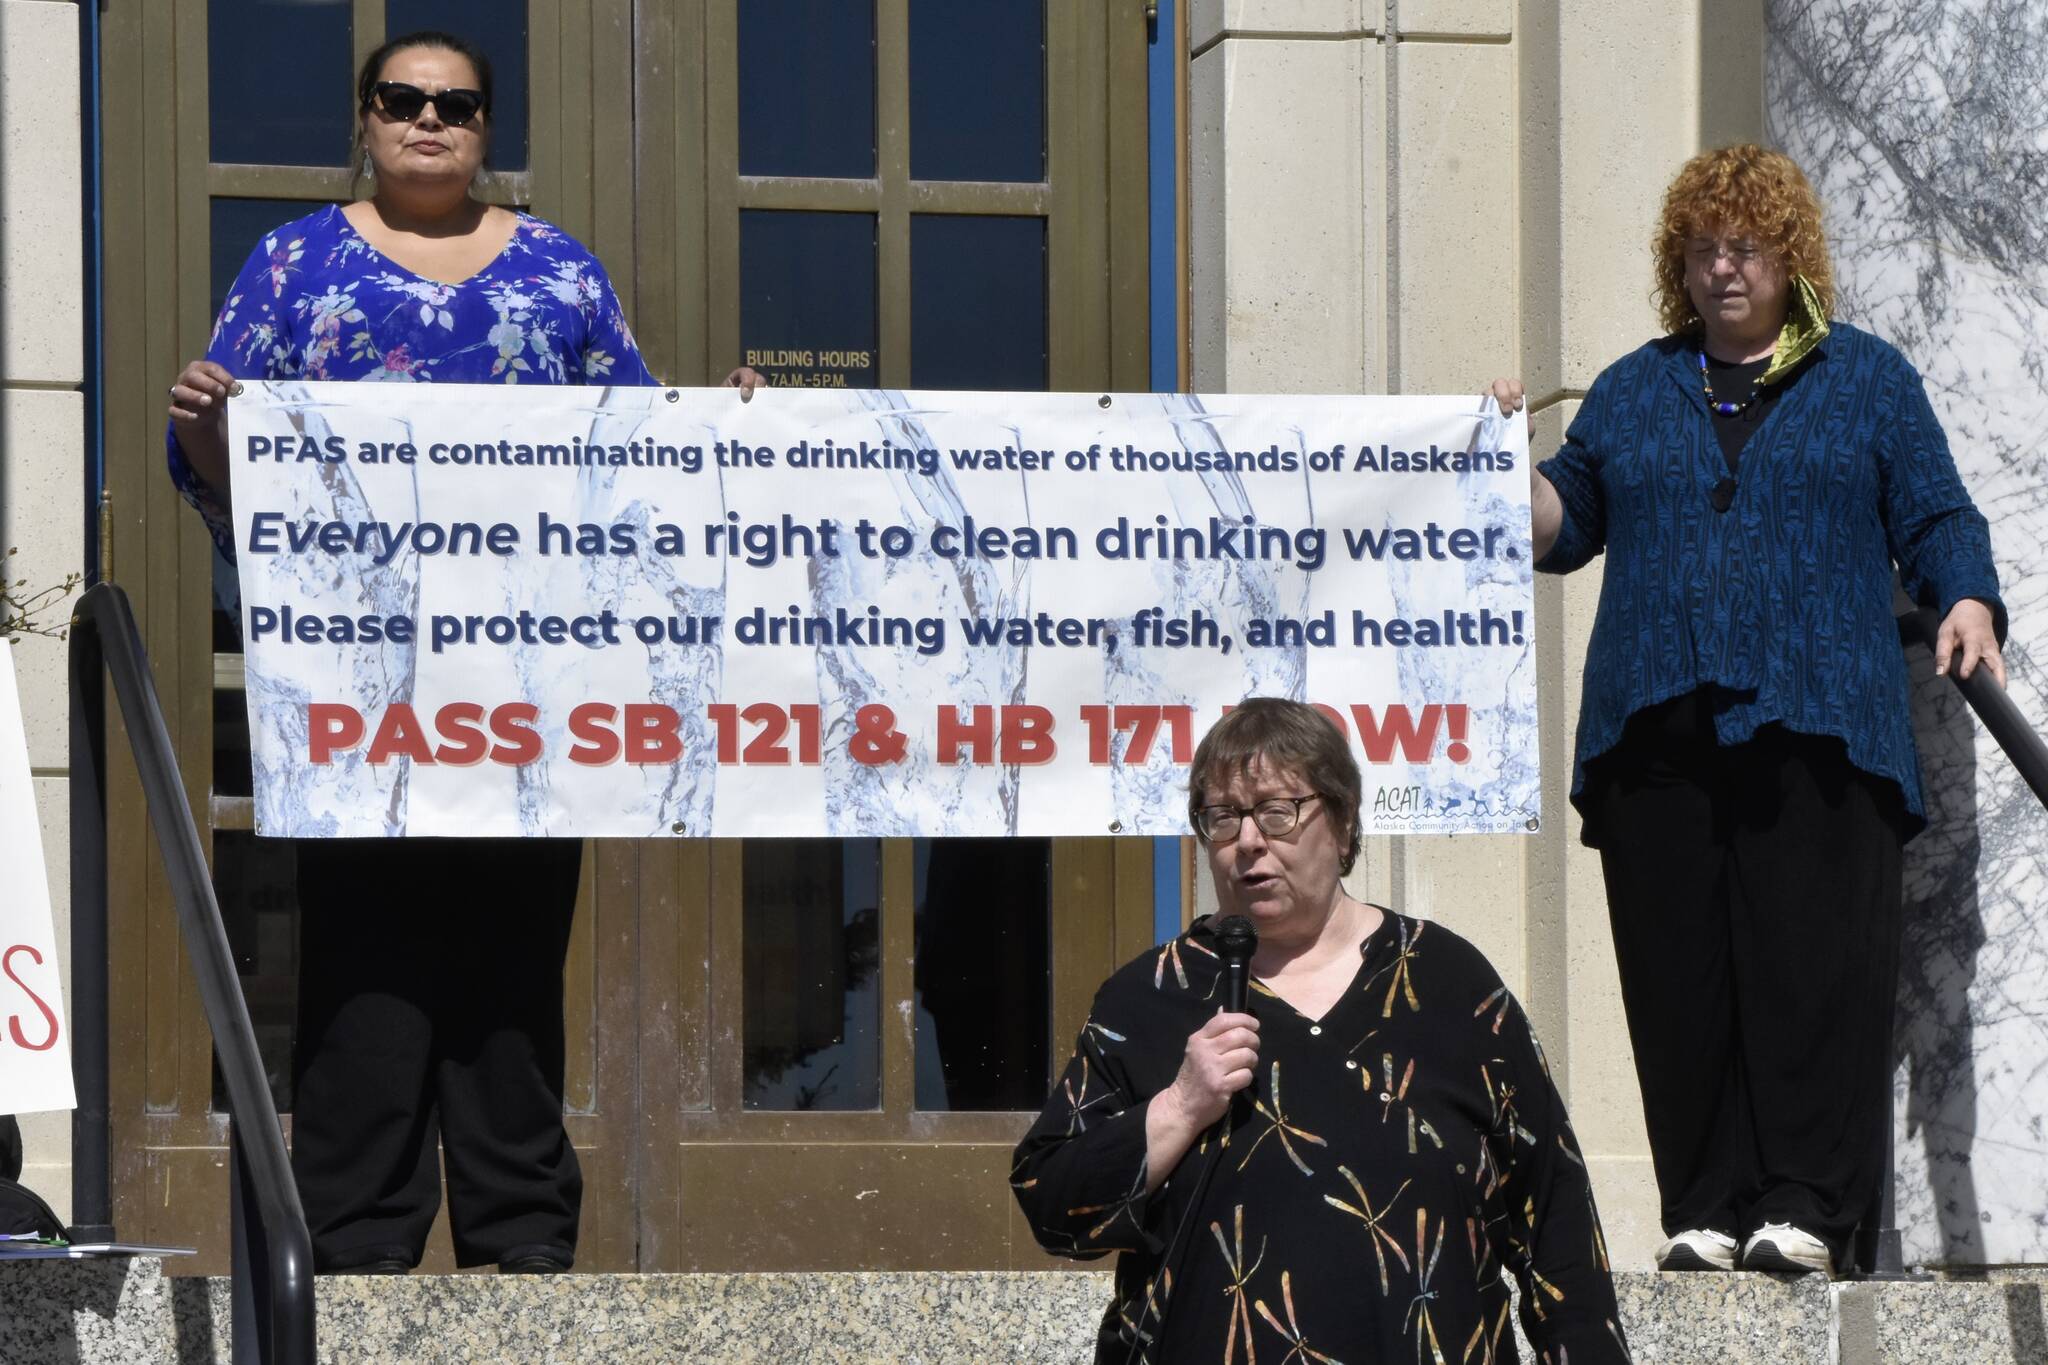 Pamela Miller, executive director of Alaska Community Action on Toxics, speaks at a rally at the Alaska State Capitol on Thursday, May 12, 2022, calling on lawmakers to pass legislation regulating PFAS chemicals, so-called 'forever chemicals' that have been found to contaminate water and cause health issues. PFAS contamination has been found at several sites around the state, mainly around airports where the chemicals are used in fire-fighting foams.  (Peter Segall / Juneau Empire)